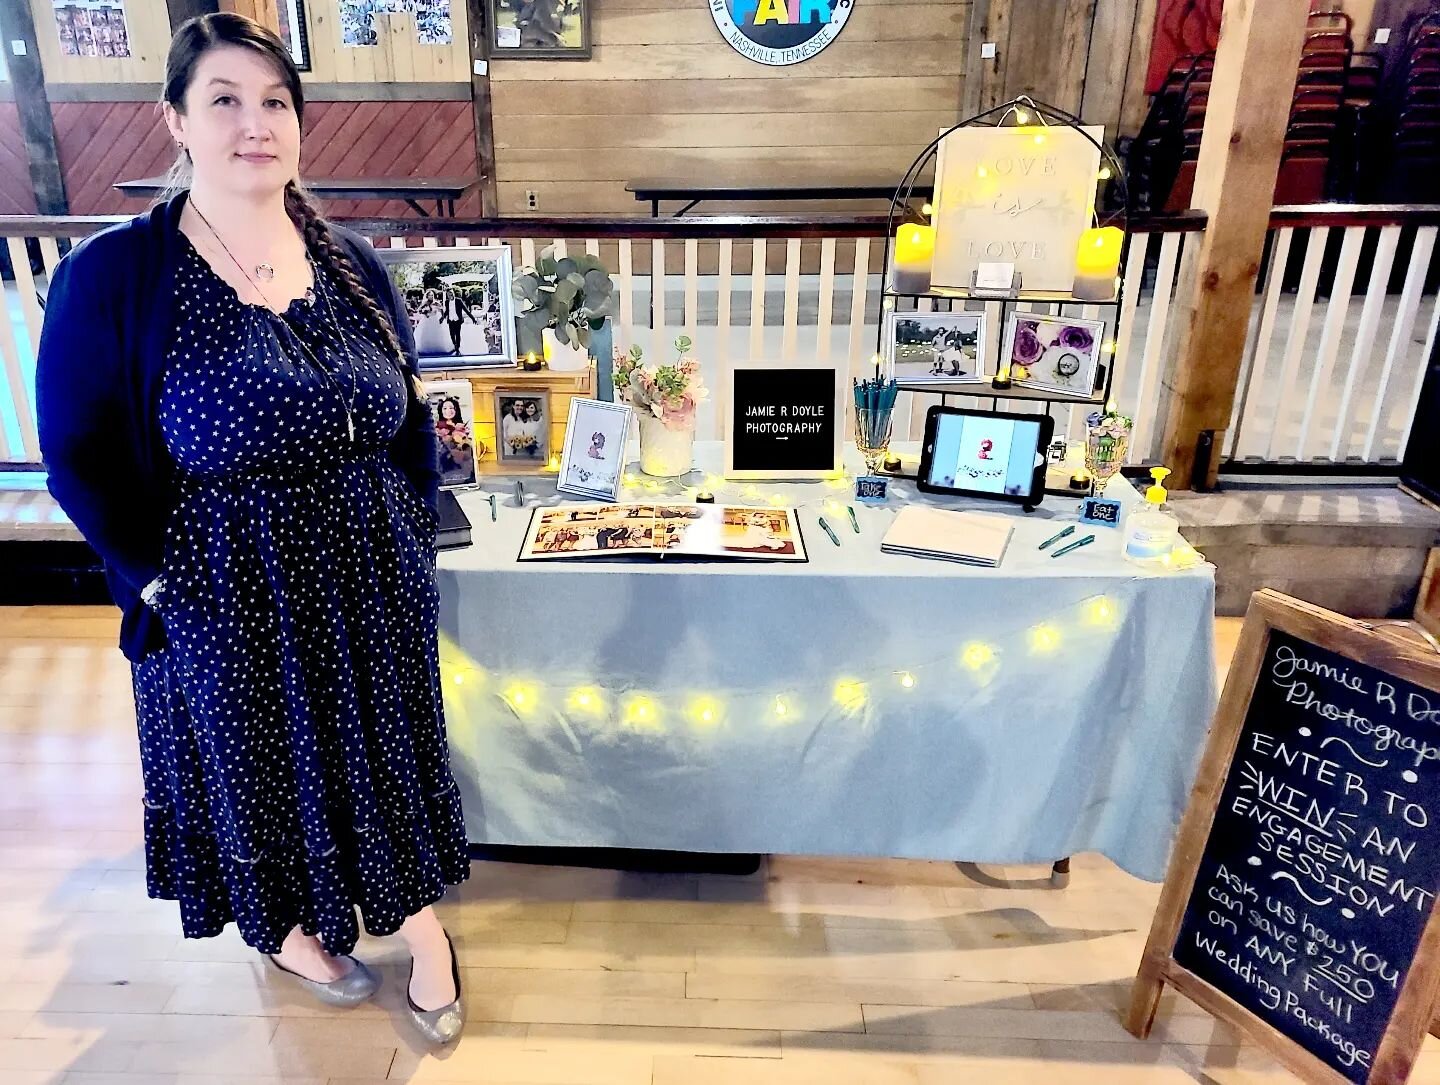 Thank you to everyone that stopped by my table at the Rustic Bridal Expo on Sun, 3/26. It was lovely meeting all the new brides with their family or bridal crew! 💜

Thank you to @bridalshowsbykelly for hosting a great event! 🎉

#jamierdoylephotogra